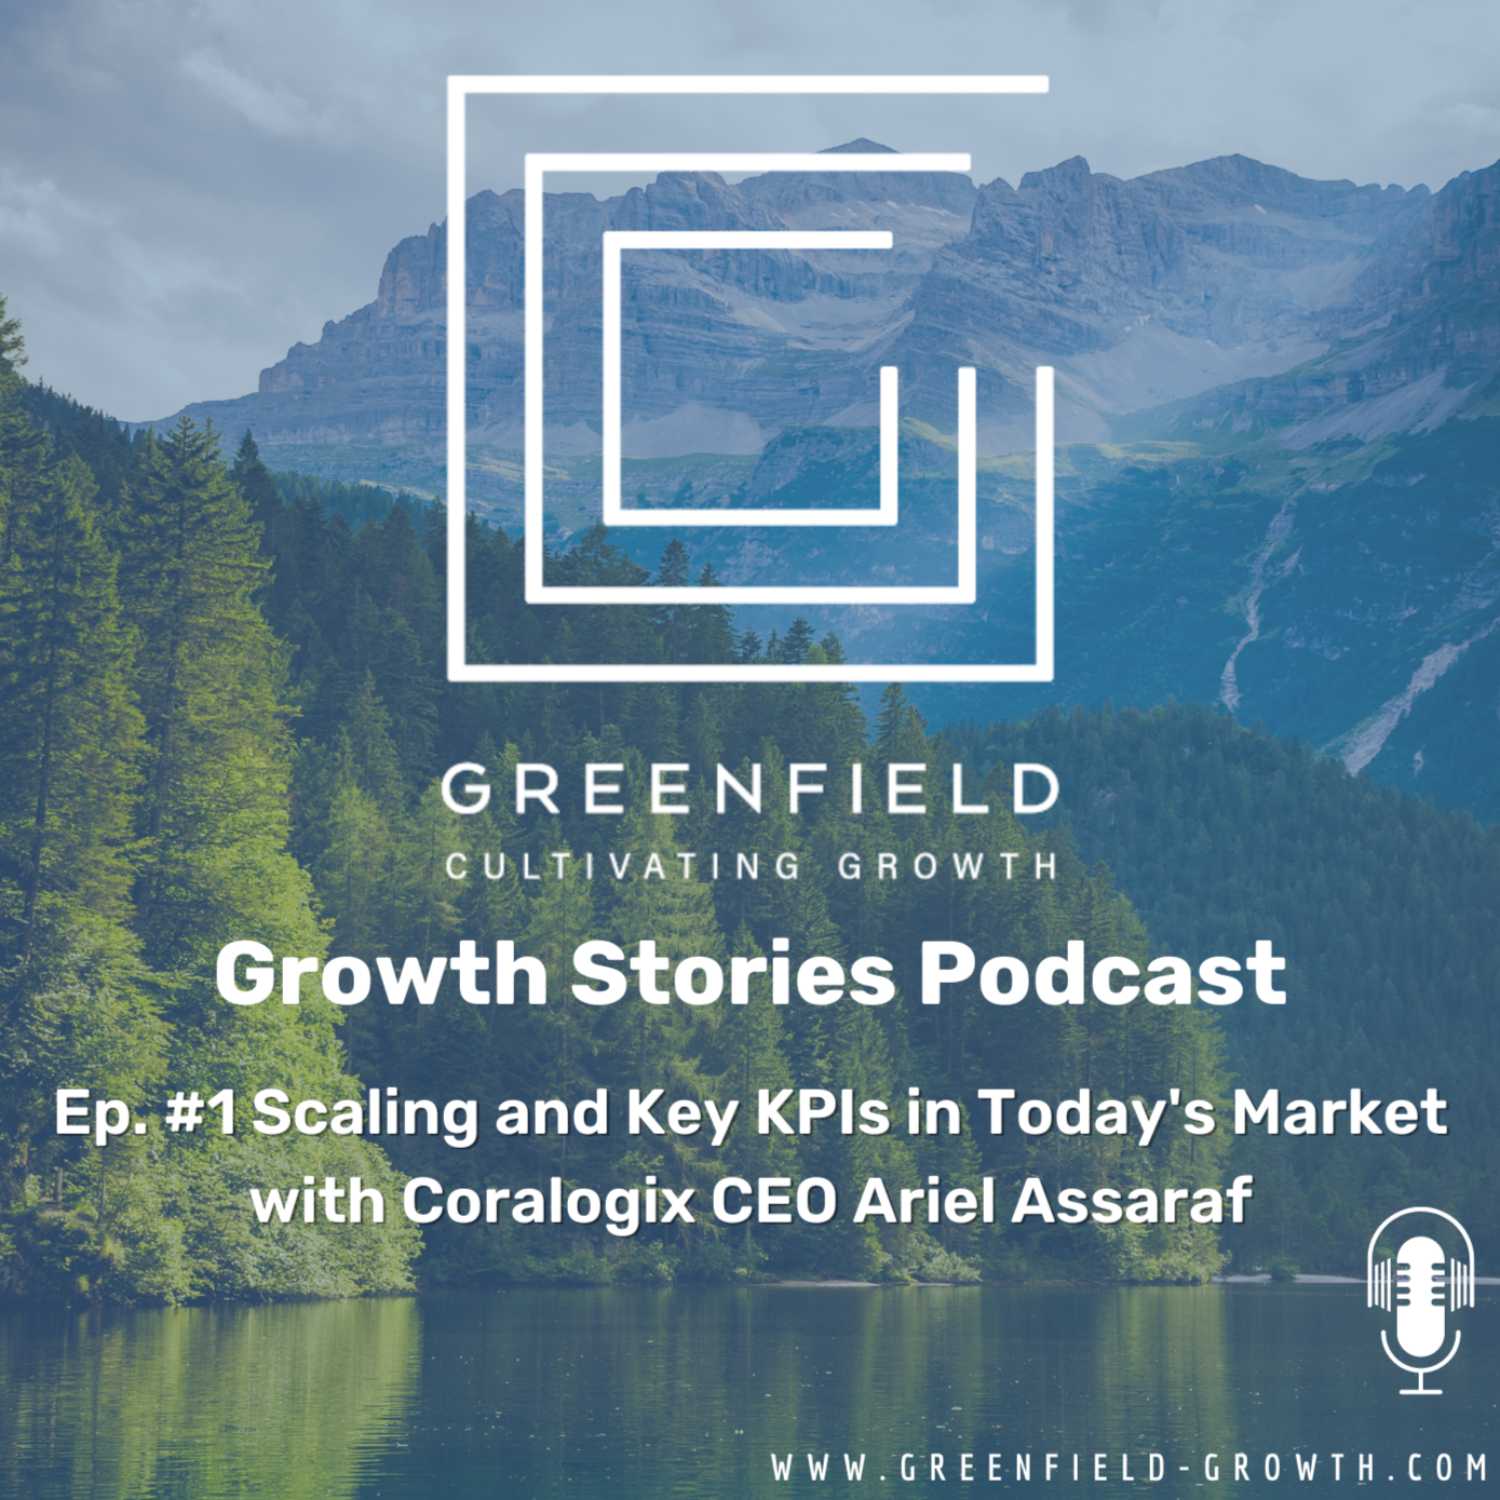 Scaling and Key KPIs in Today's Market with Coralogix CEO Ariel Assaraf